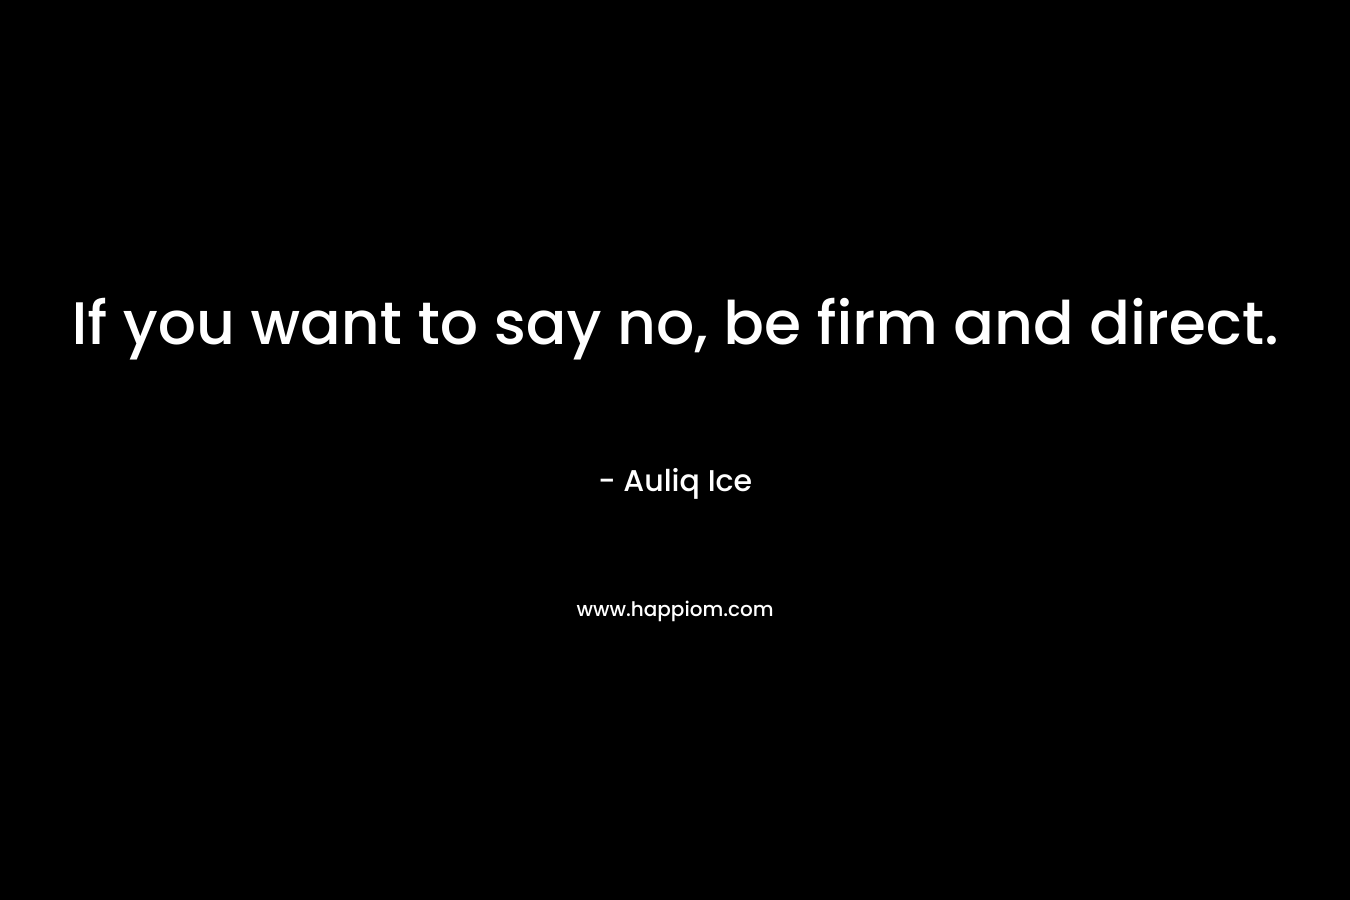 If you want to say no, be firm and direct.